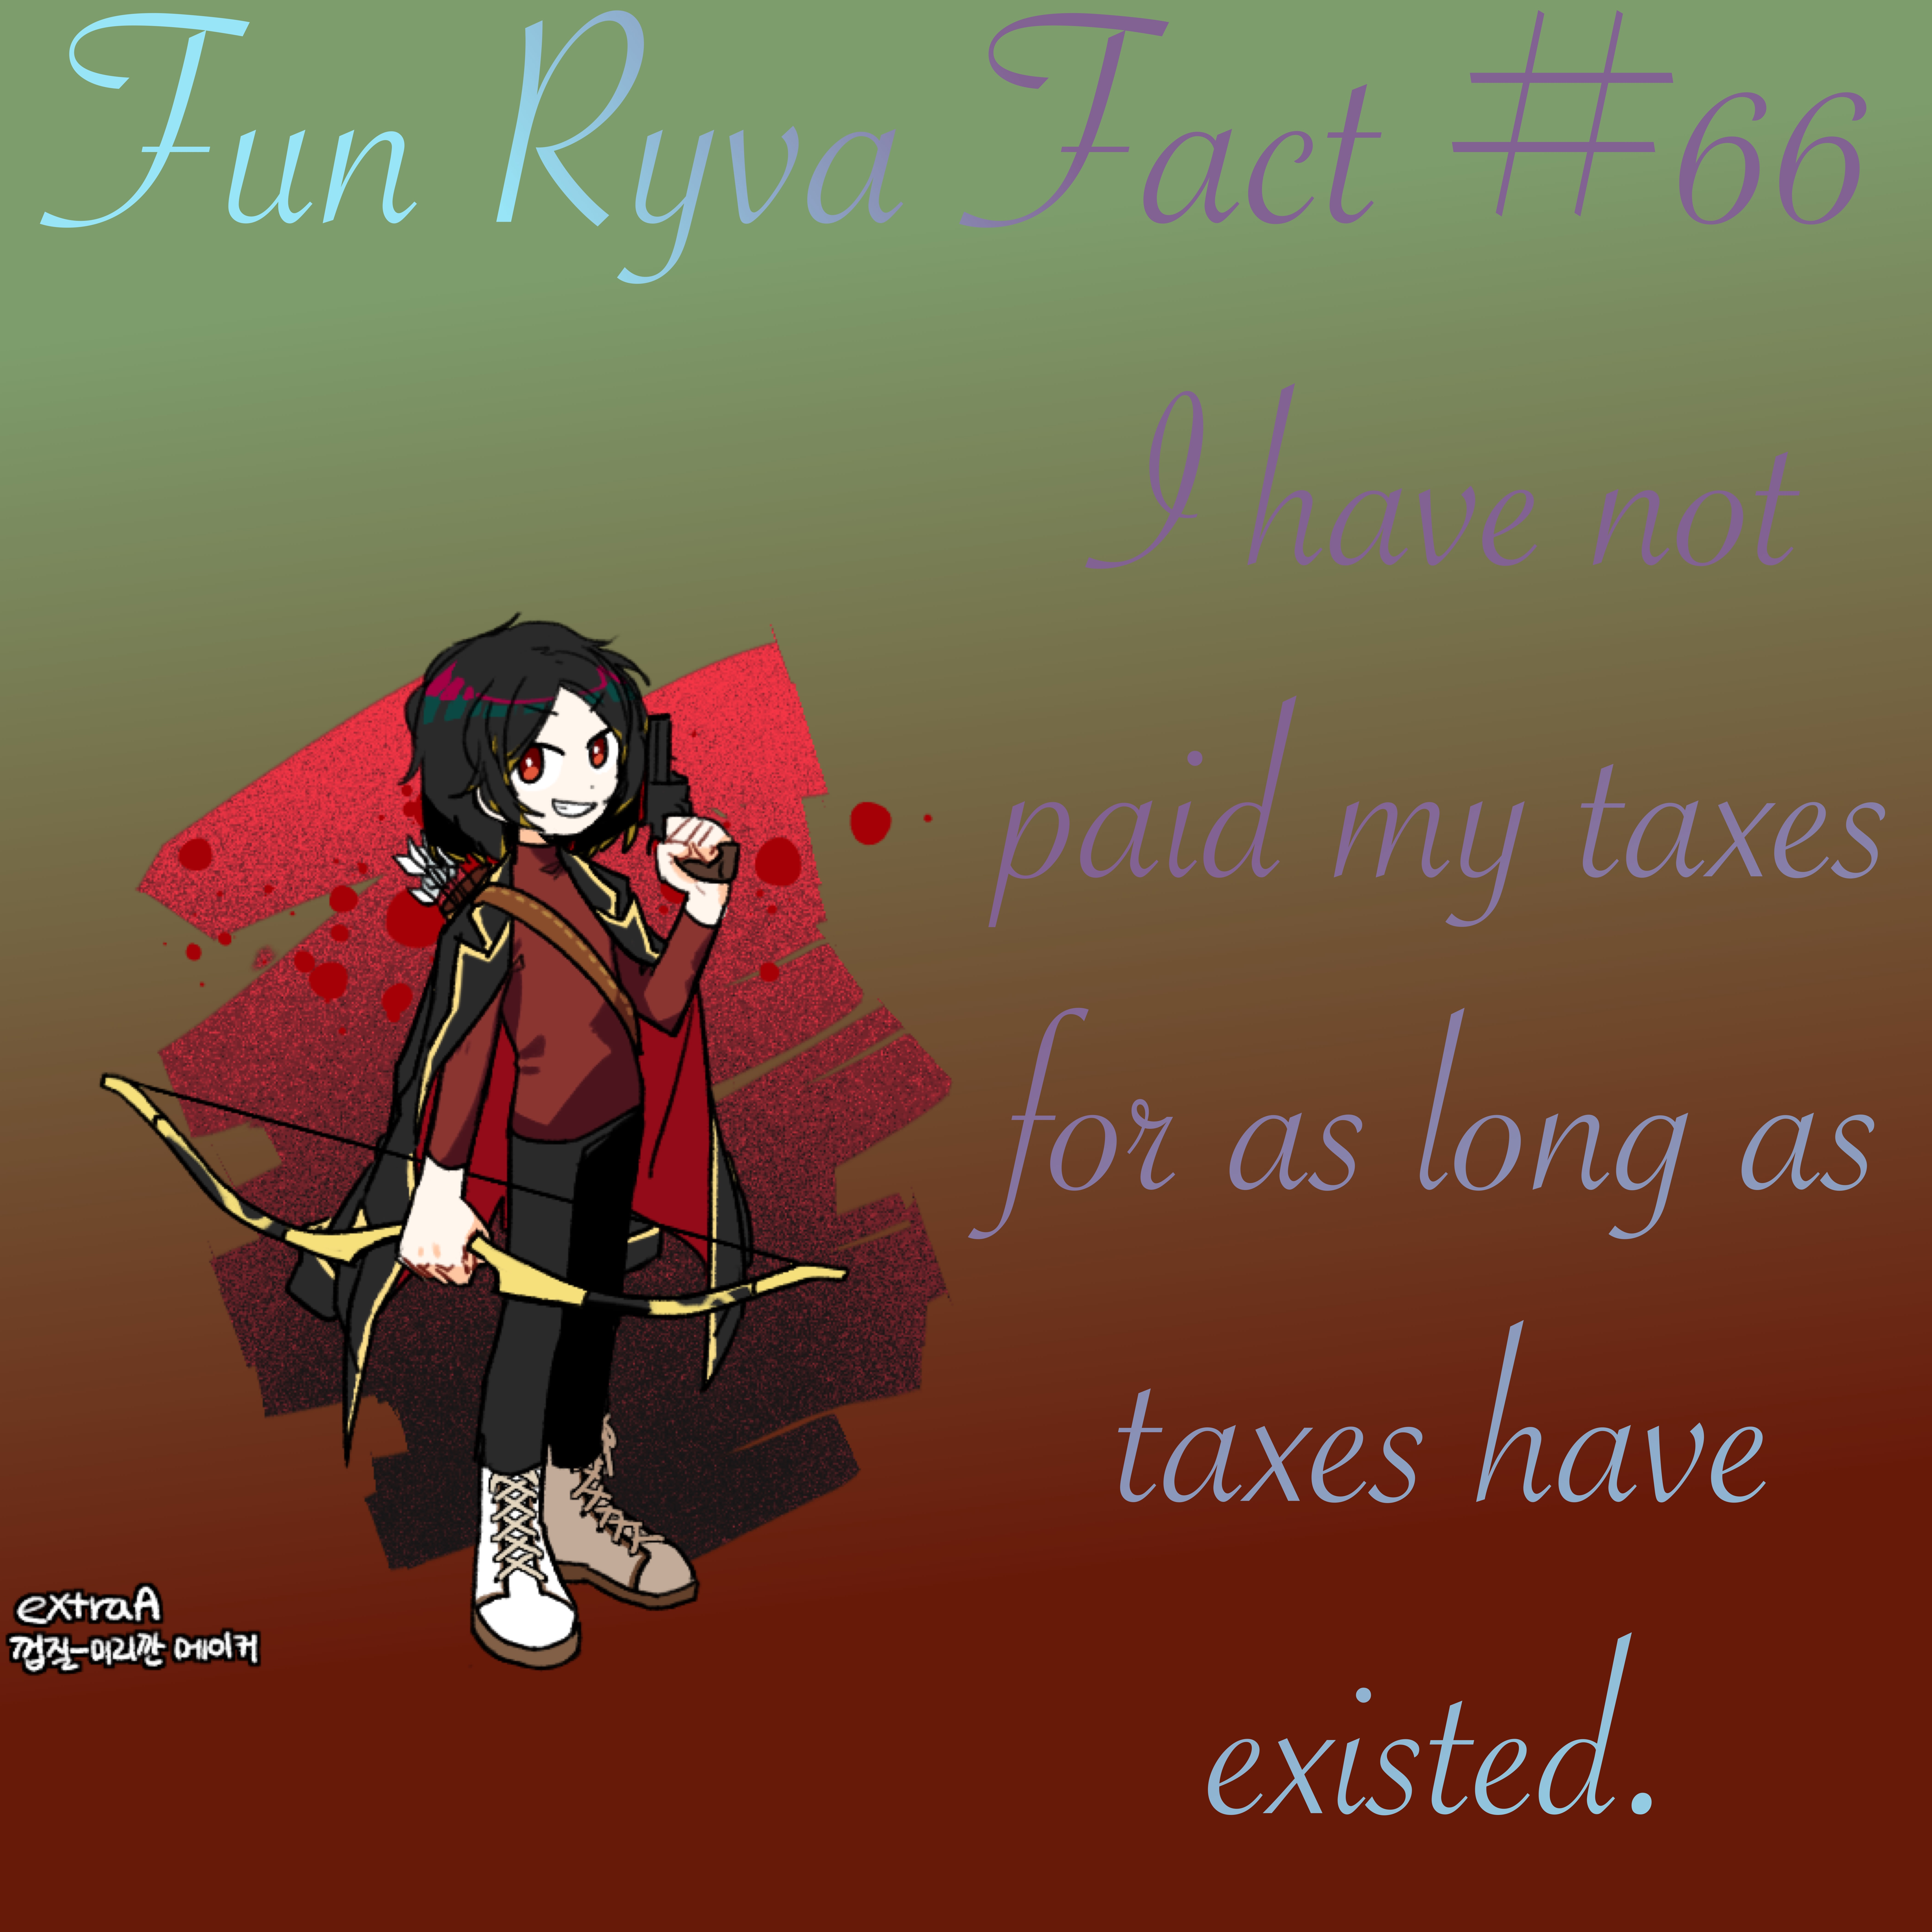 A meme reading "Fun Ryva Fact #66" above an image of the character Ink and text reading "I have not paid my taxes for as long as taxes have existed."